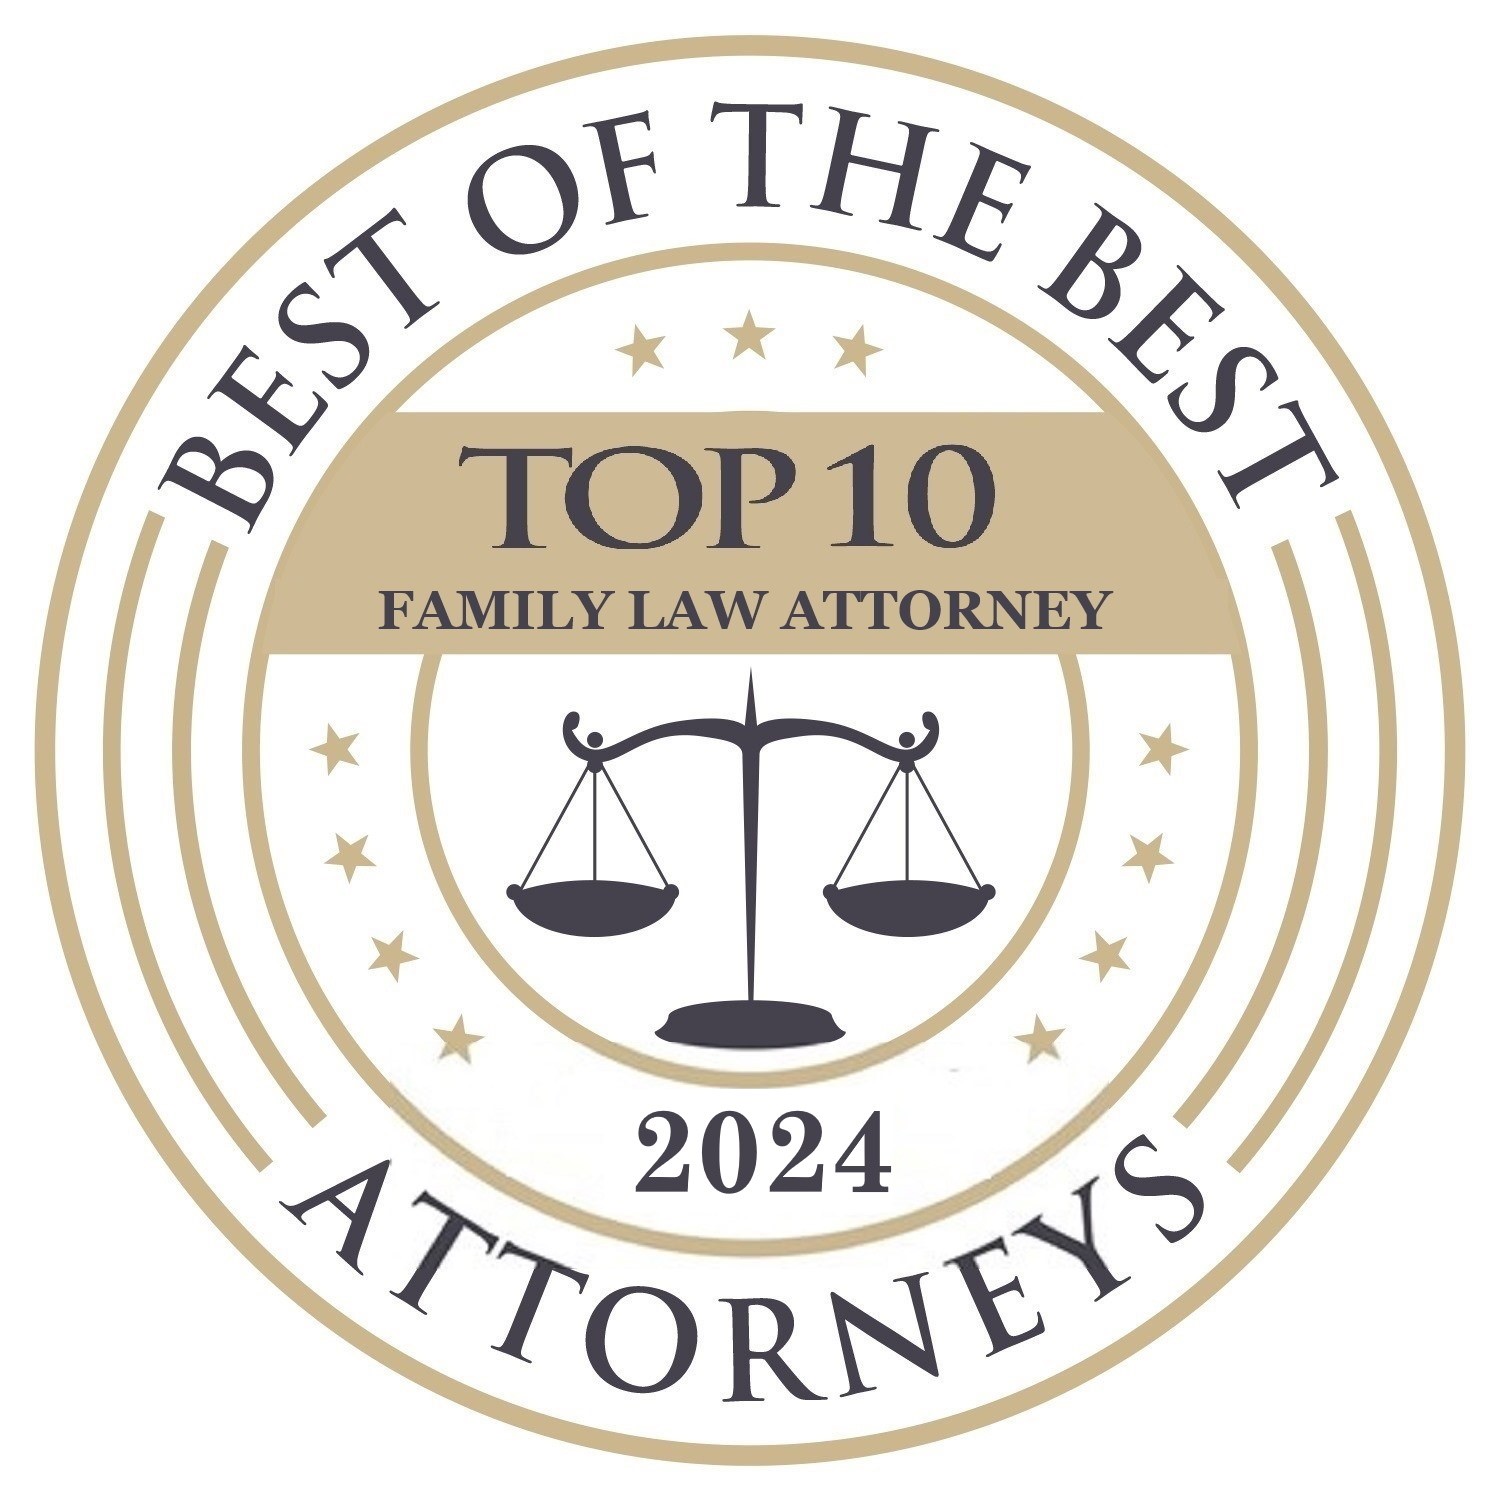 Image of Top 10 family law Logo